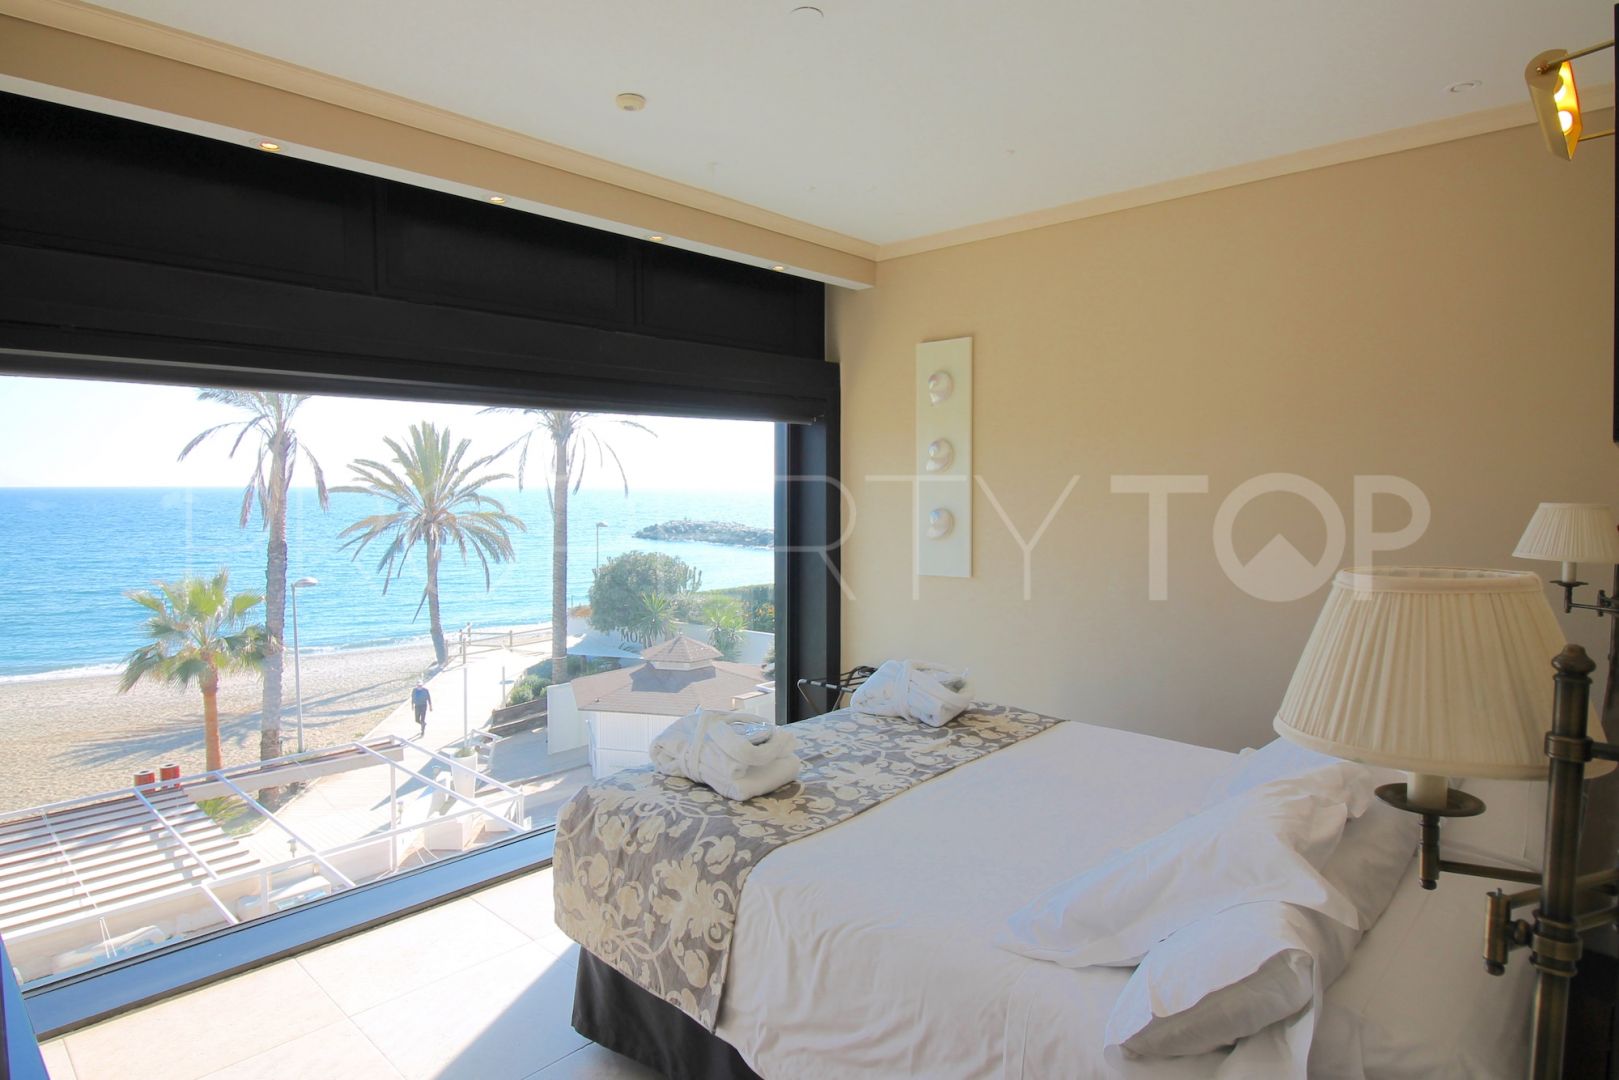 24 Recomended Guadalpin marbella apartments for sale with Simple Design